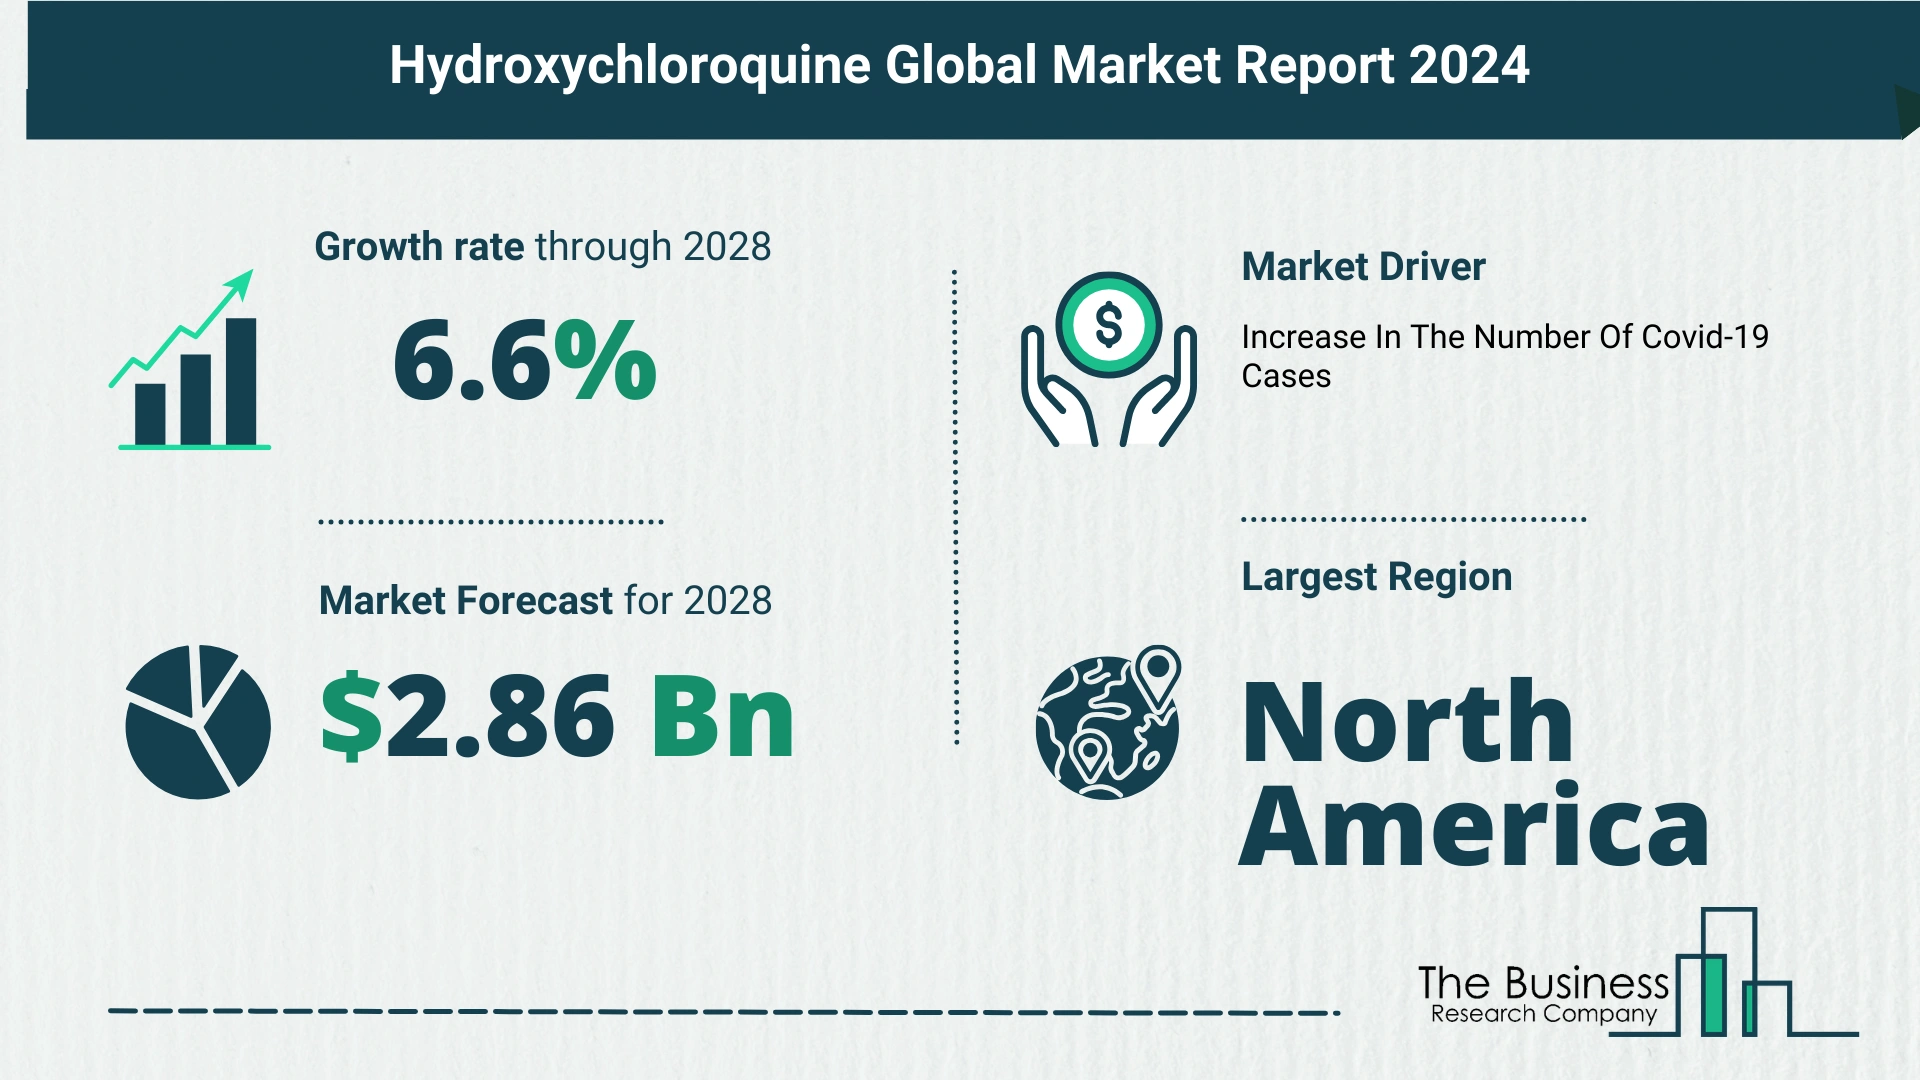 Key Trends And Drivers In The Hydroxychloroquine Market 2024